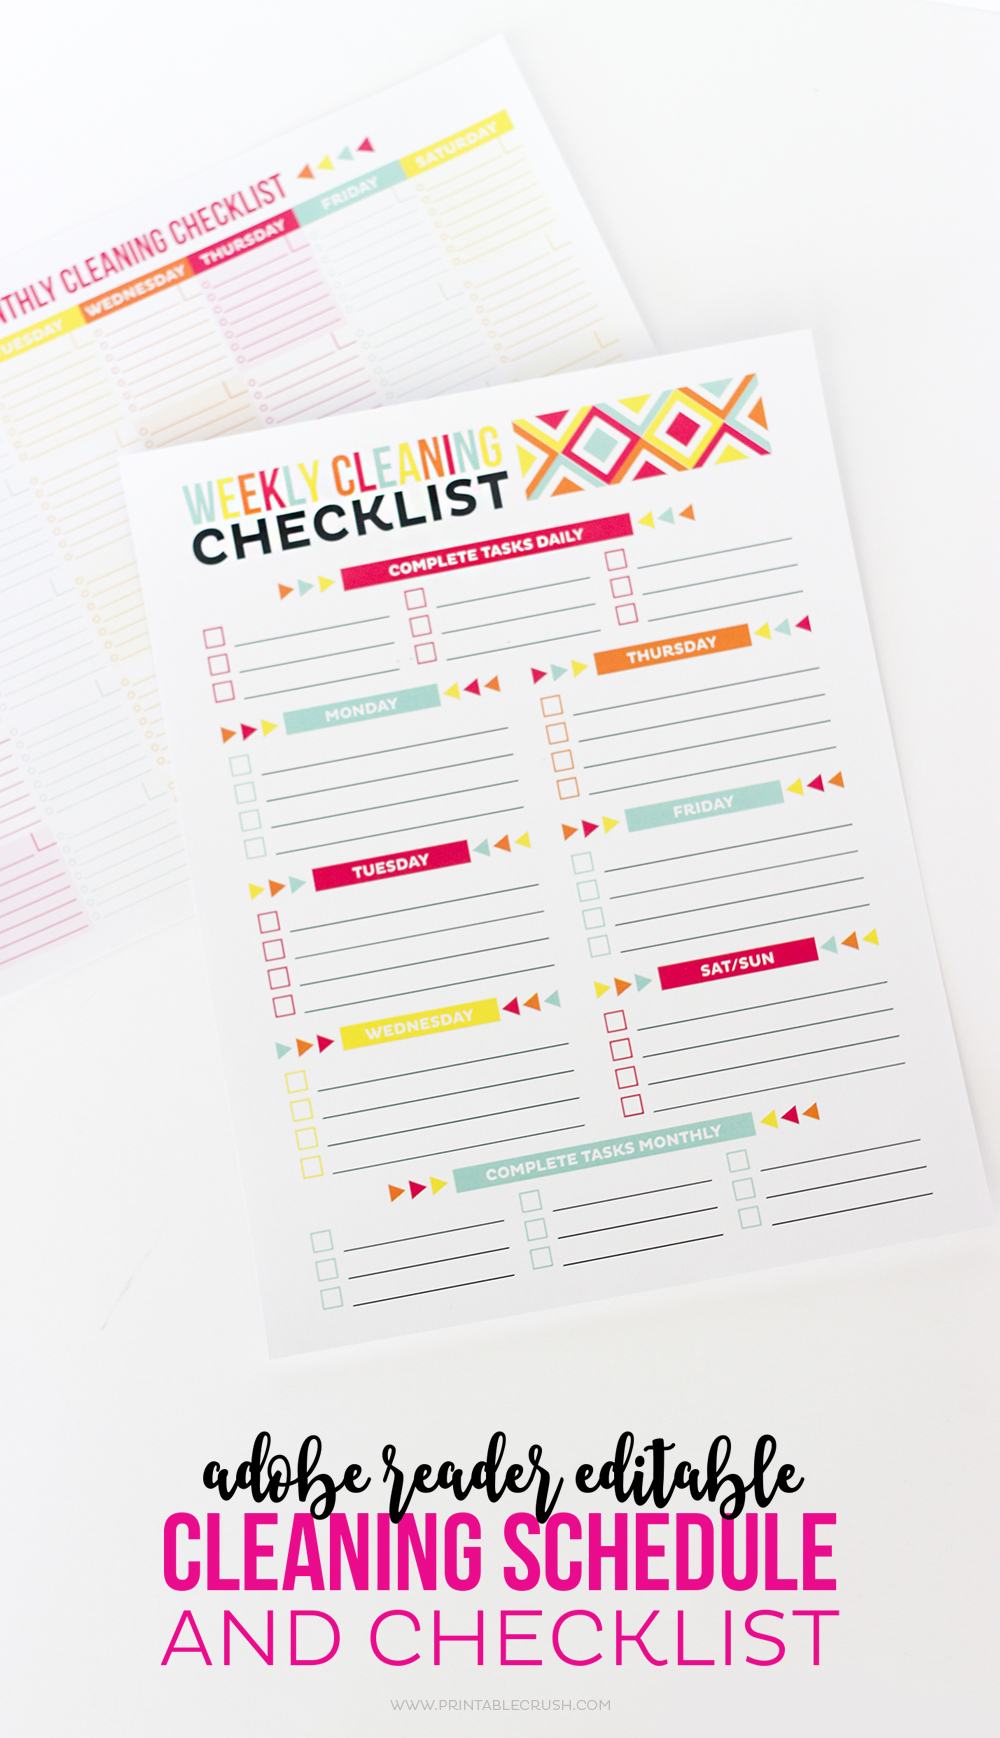 Get your home clean and organized with this Adobe Reader Editable Cleaning Schedule and Checklist! 